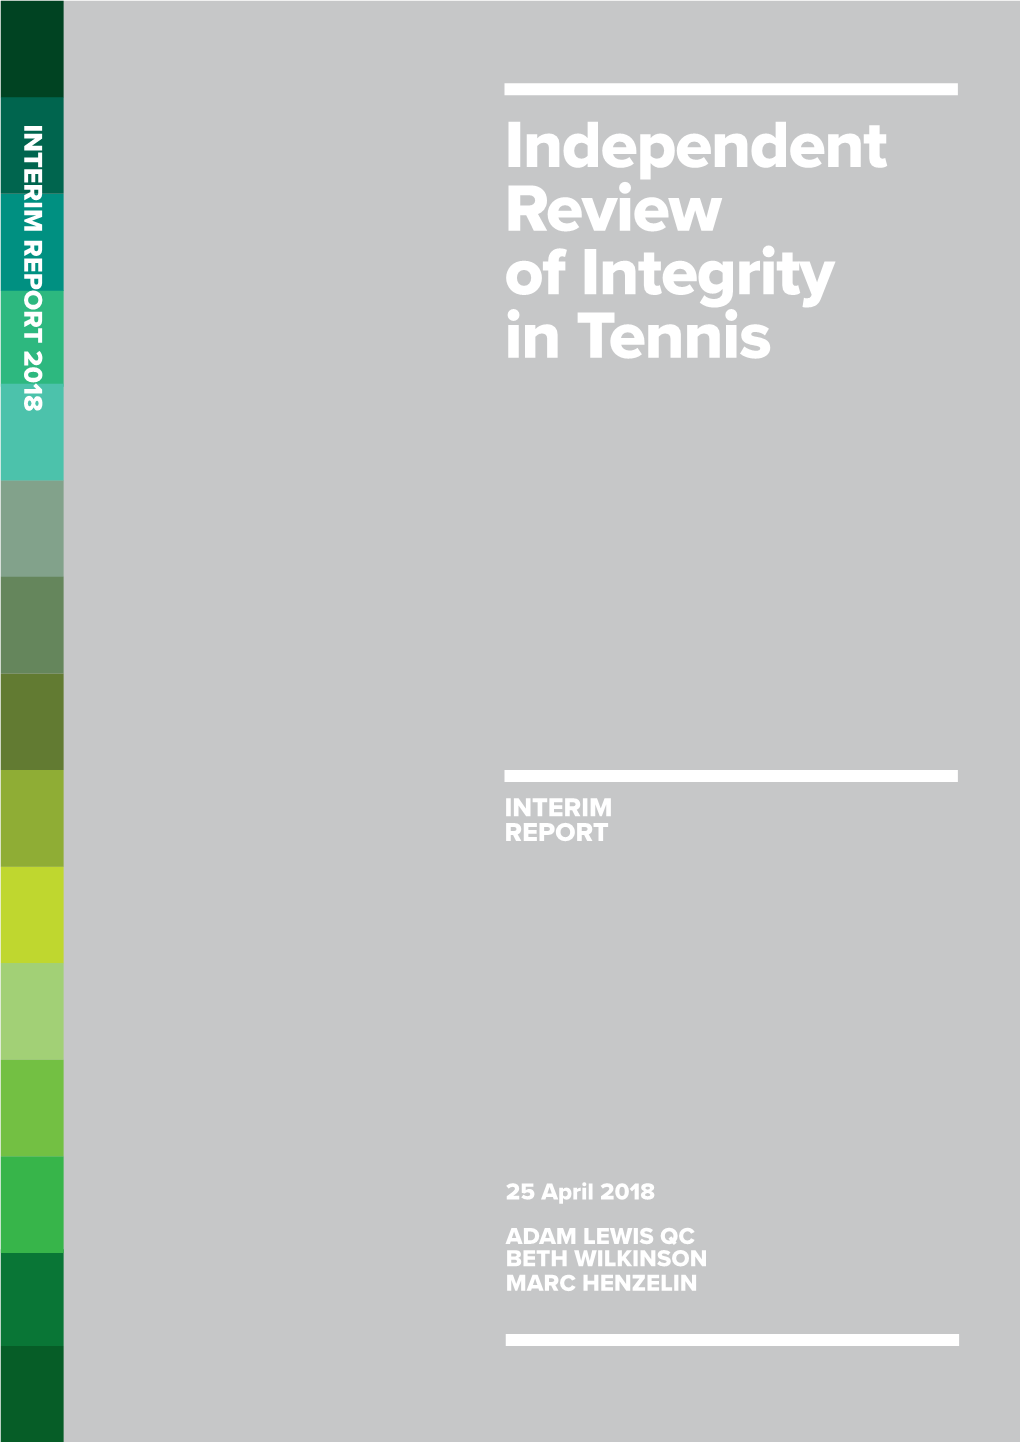 Independent Review of Integrity in Tennis